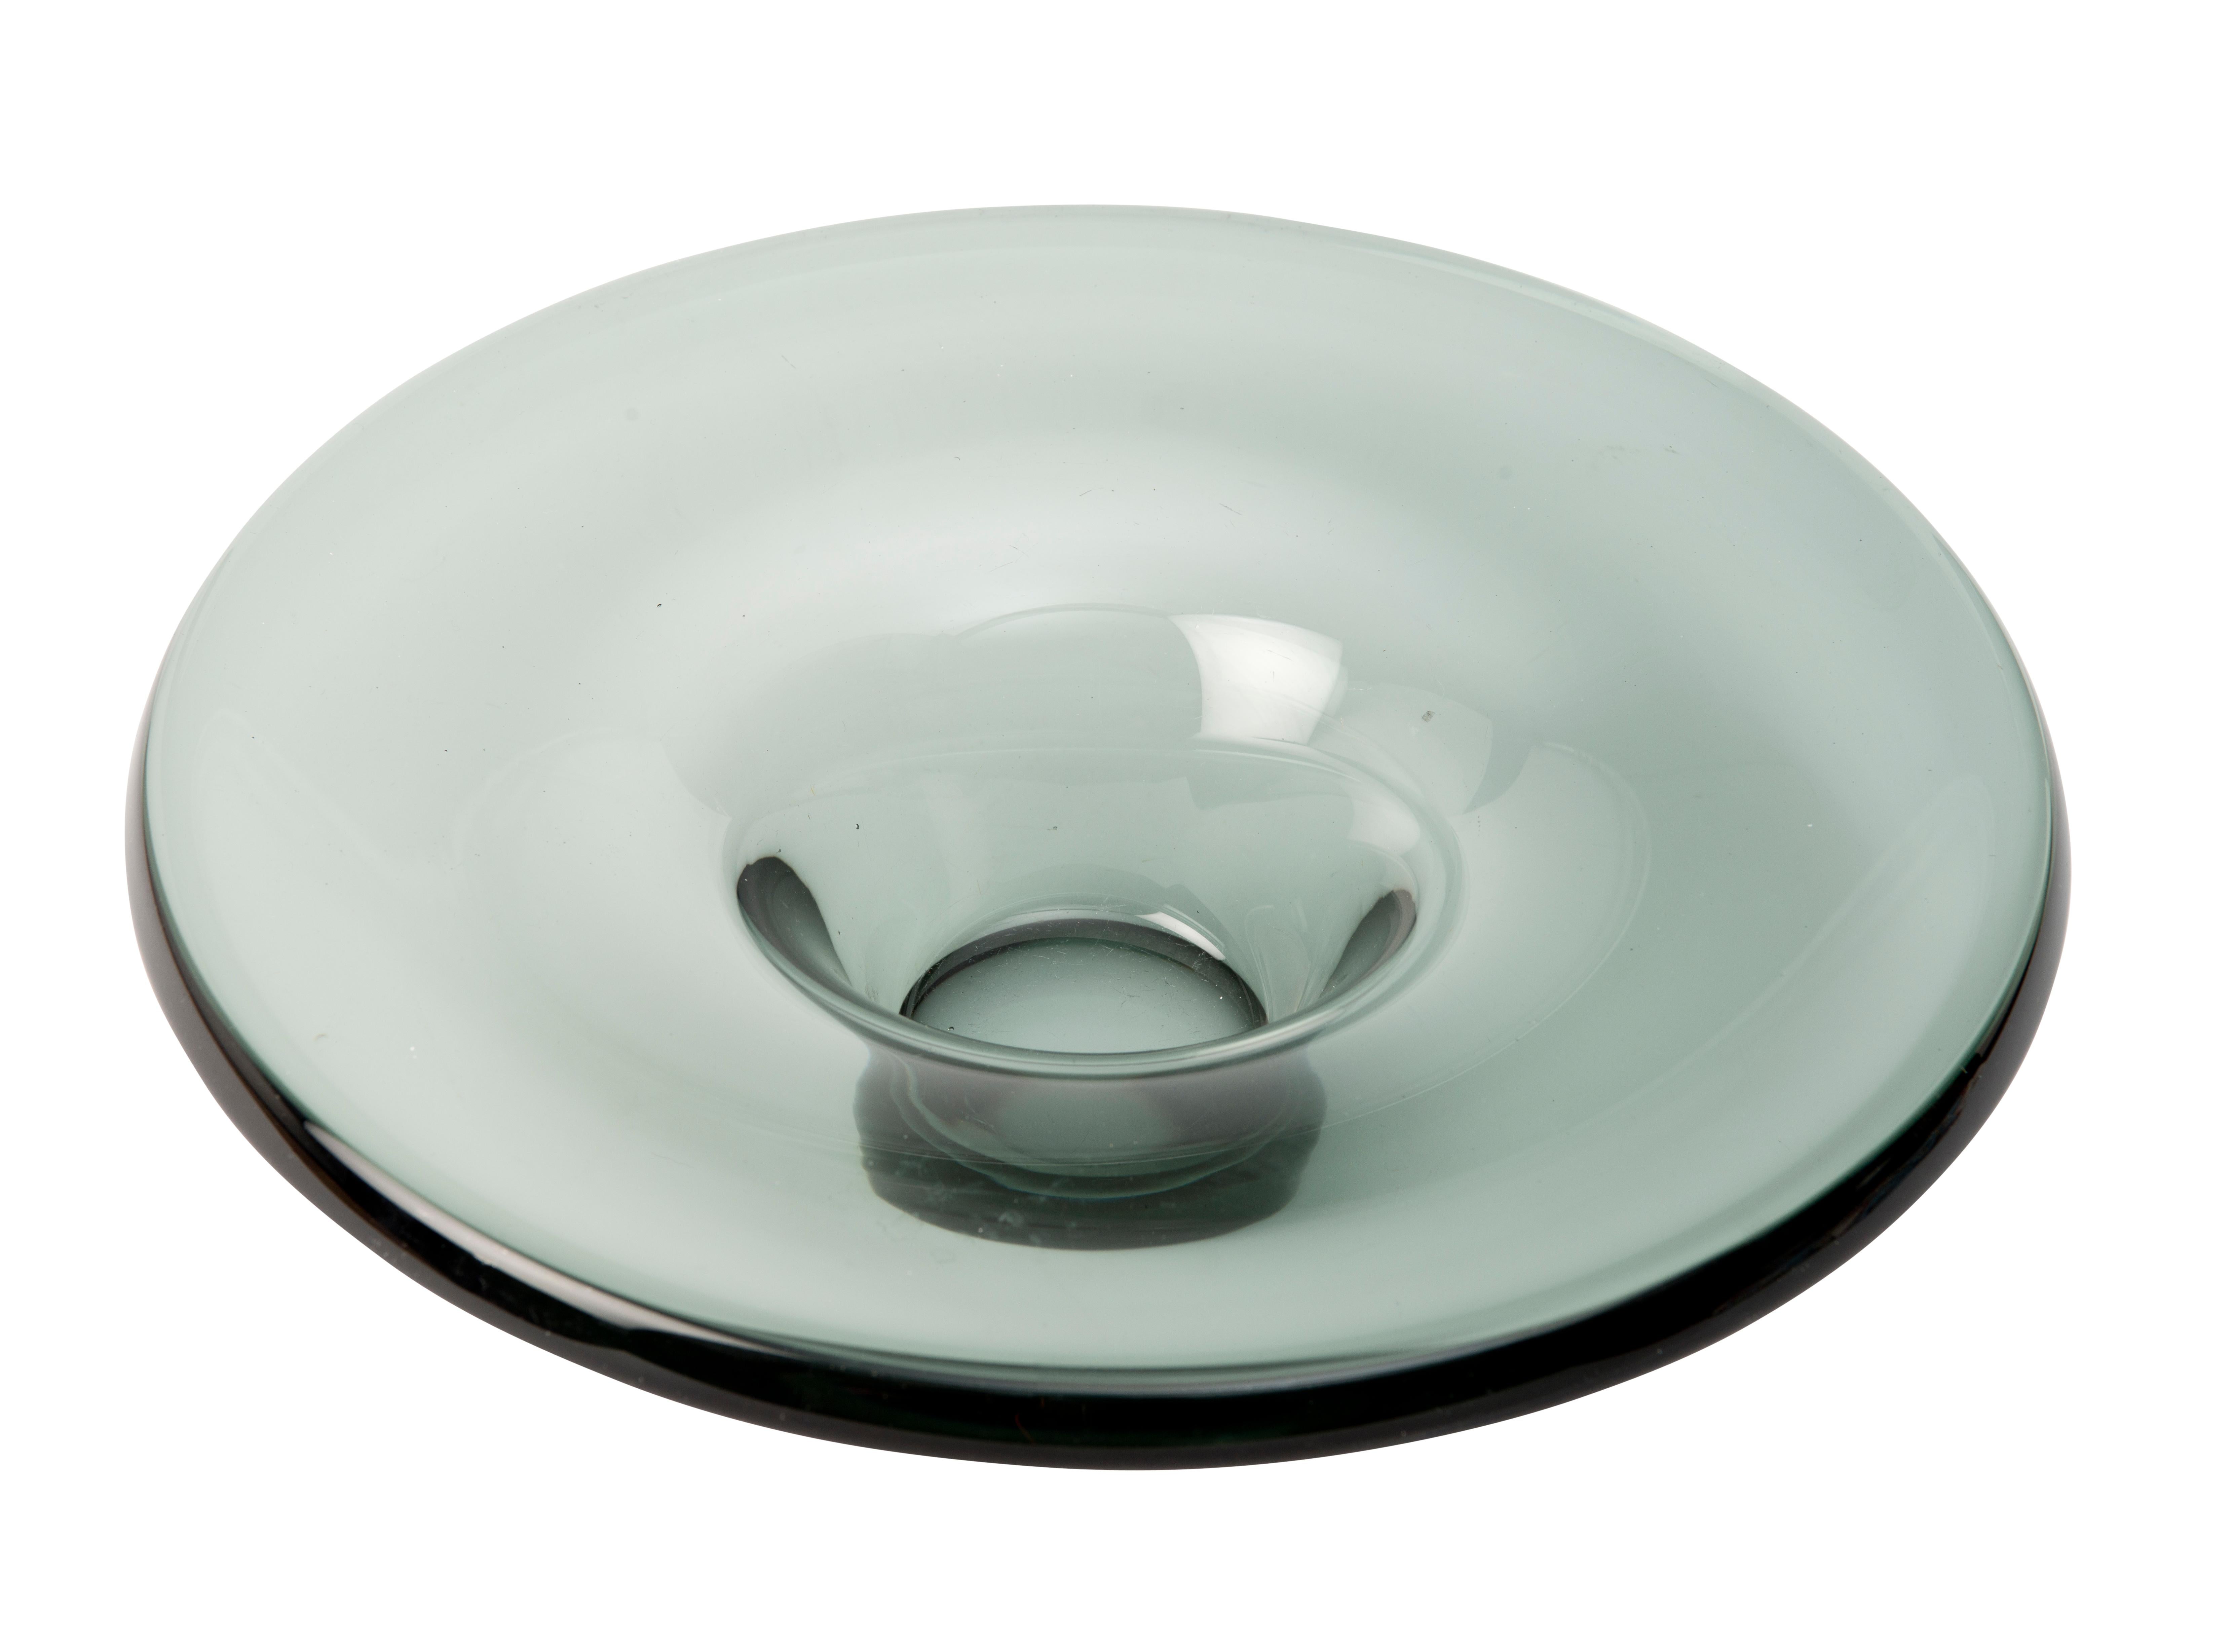 Mid-Century Modern Leerdam Bowl on Small Stand with Wide Rim by A.D. Copier, 1937 for Glasfabriek For Sale